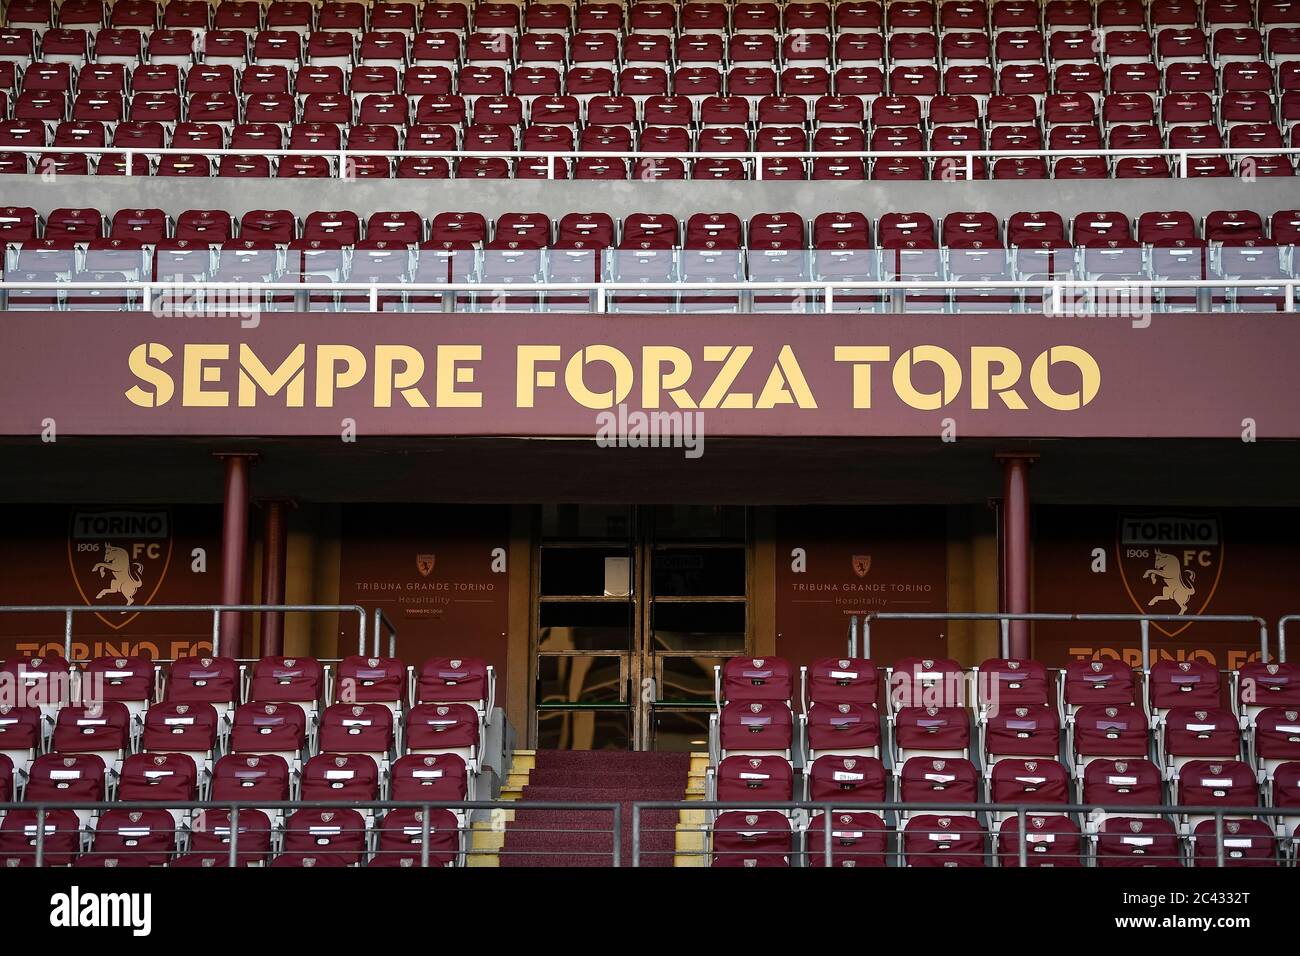 Turin, Italy - 23 June, 2020: General view of empty seats at the stadio  Olimpico Grande Torino prior to the Serie A football match between Torino FC  and Udinese Calcio. Credit: Nicolò